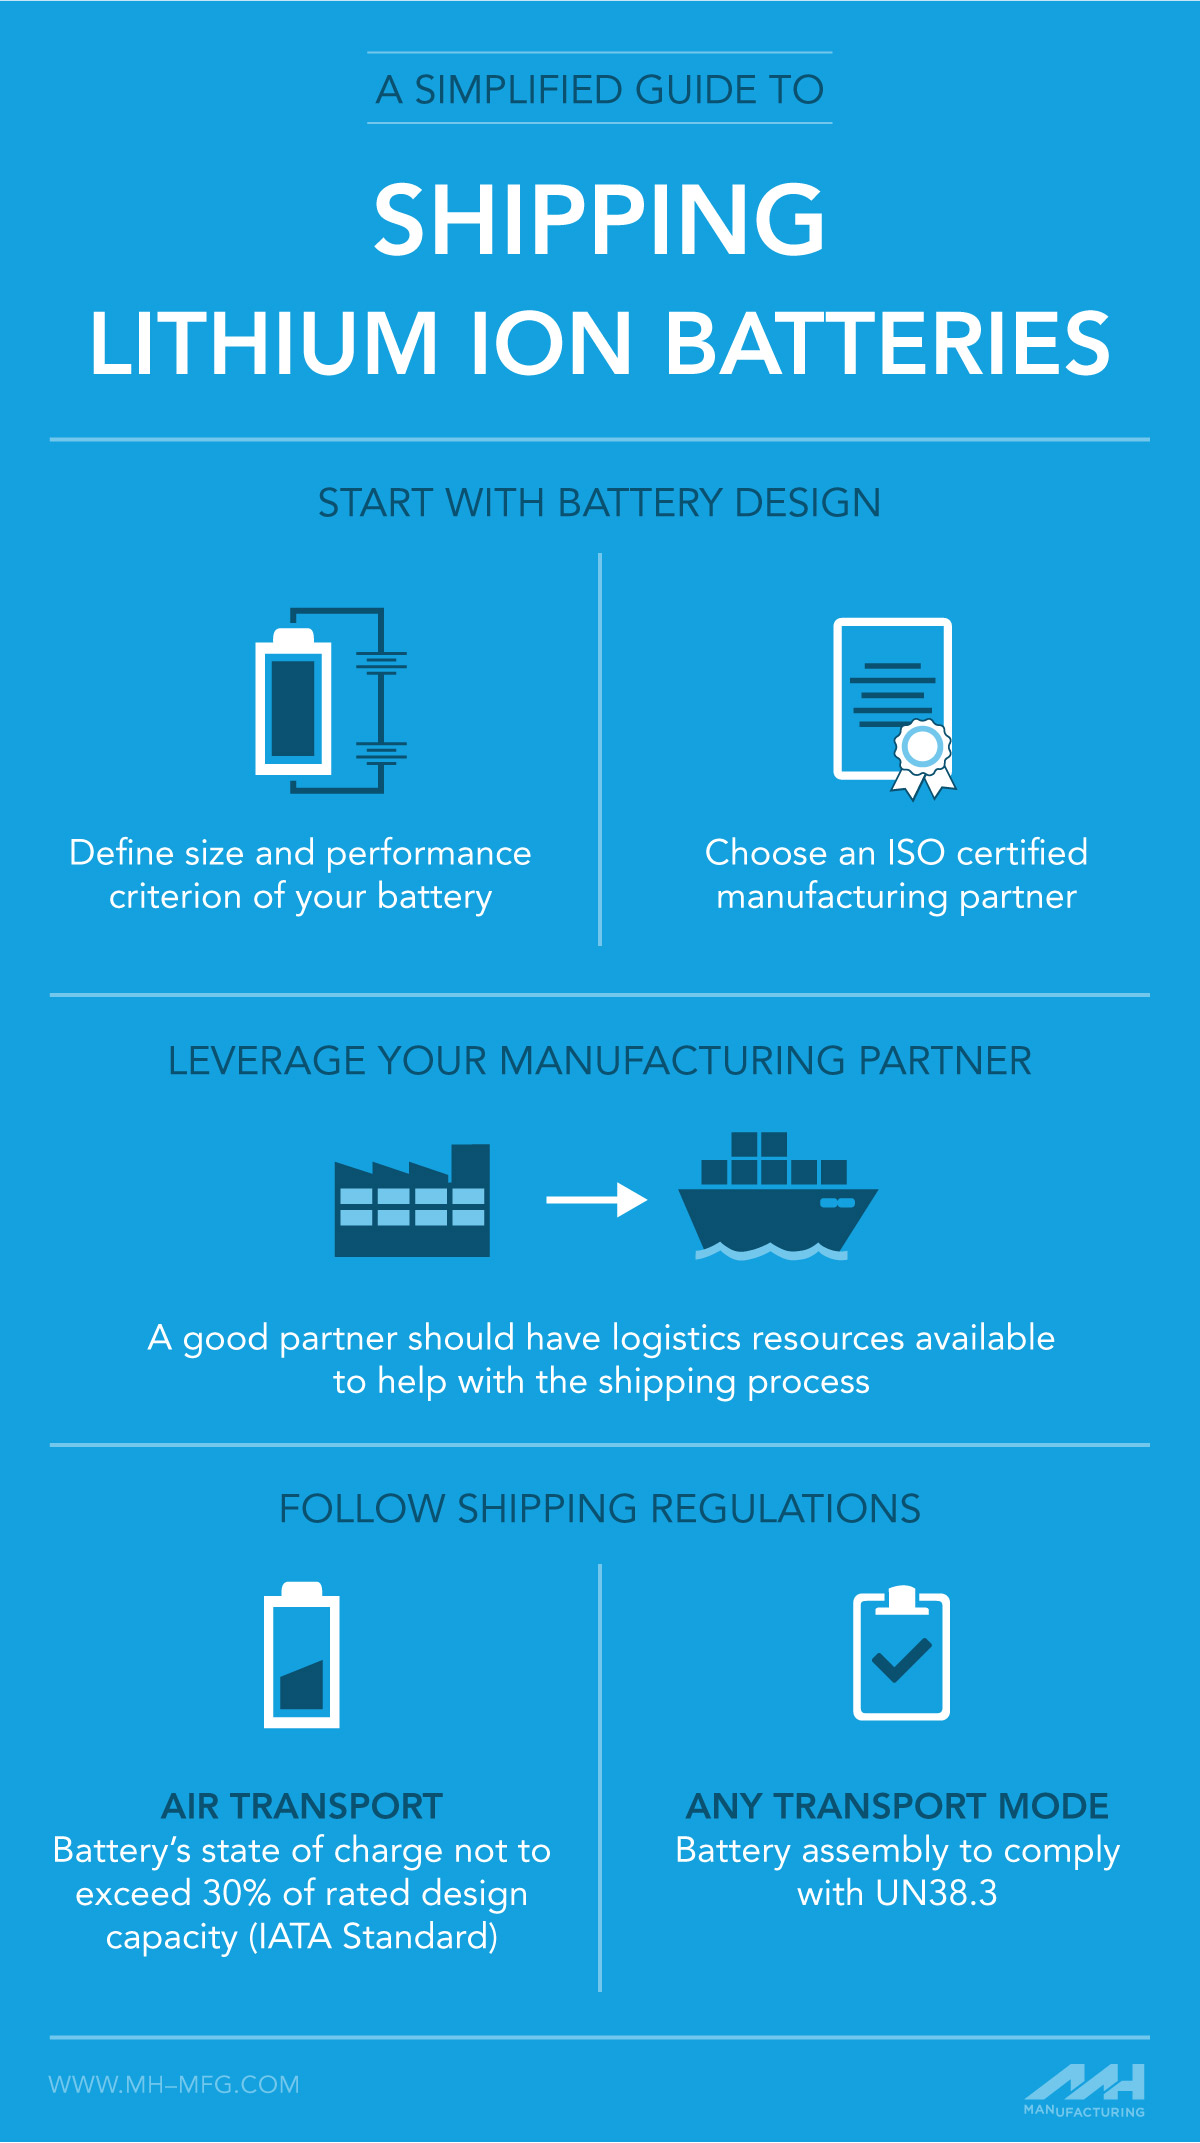 Guide to Shipping Lithium Ion Batteries